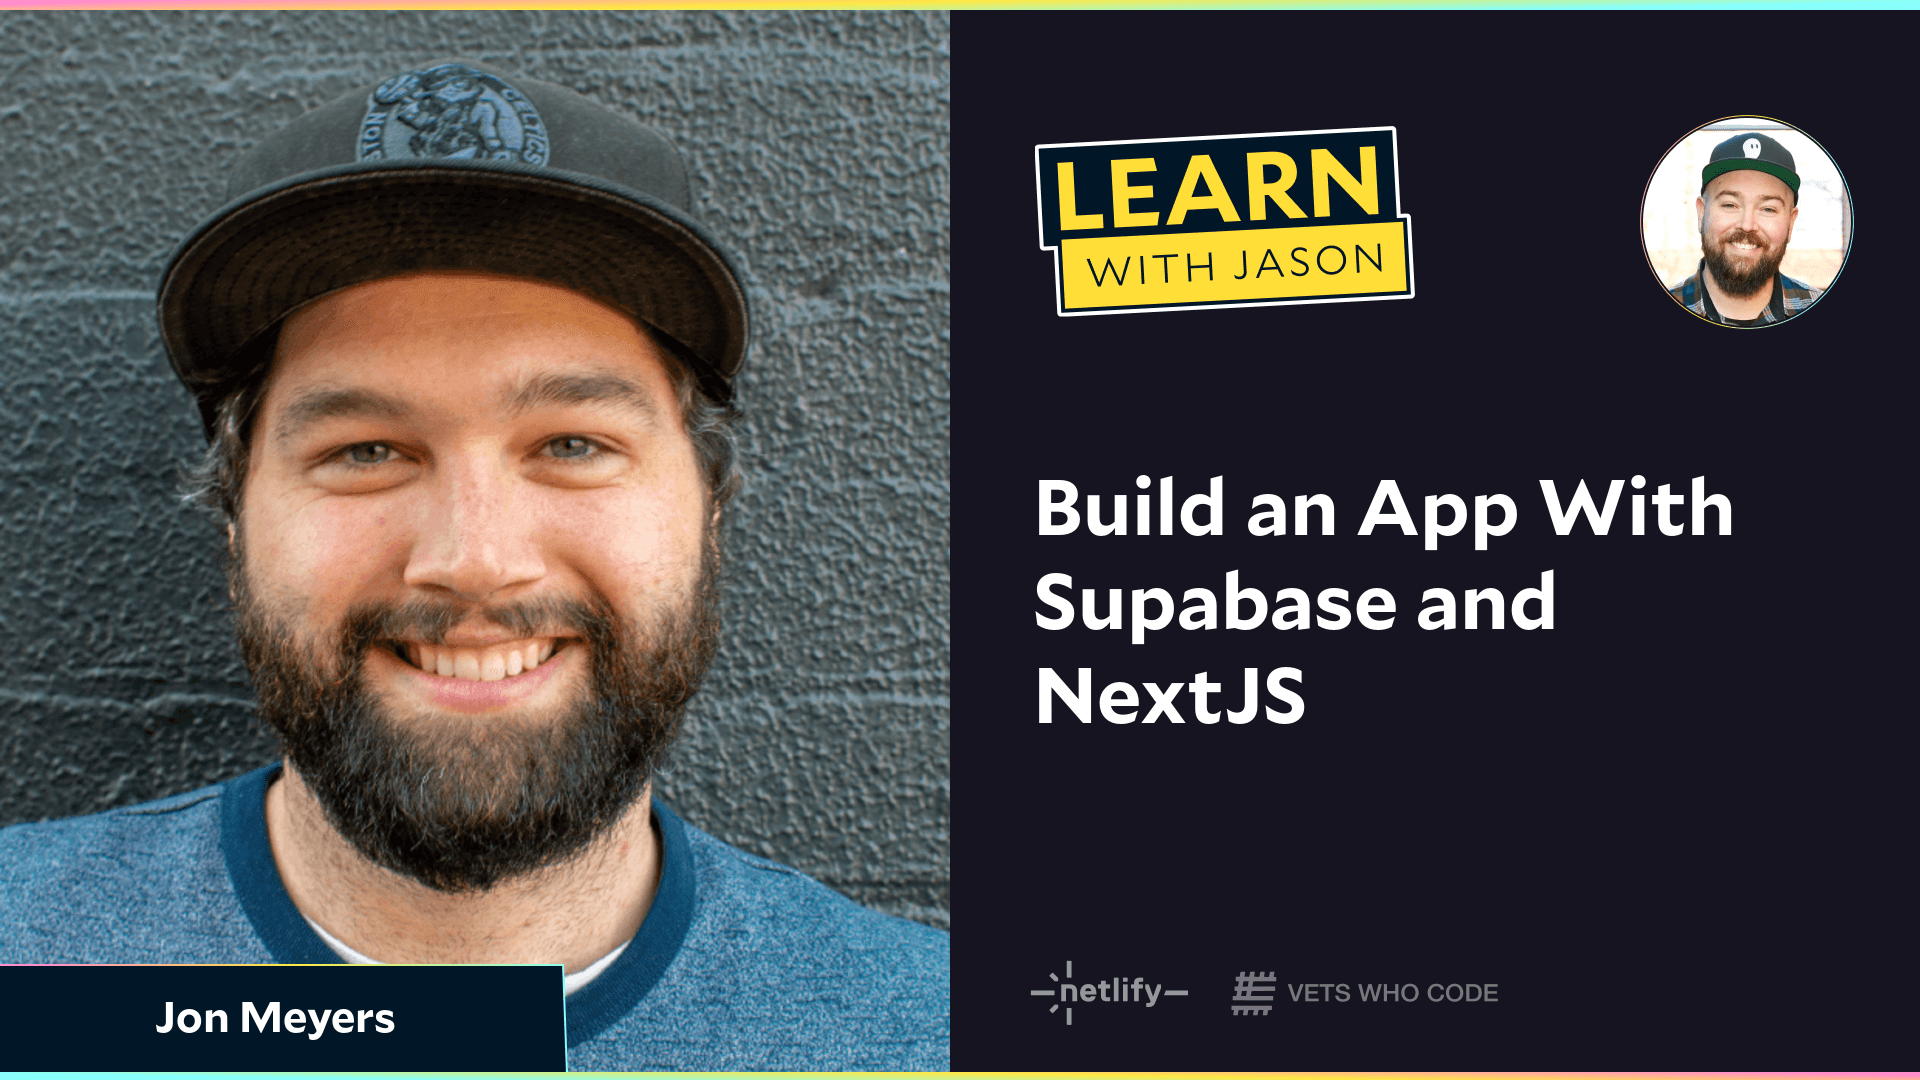 Build an App With Supabase and NextJS (with Jon Meyers)